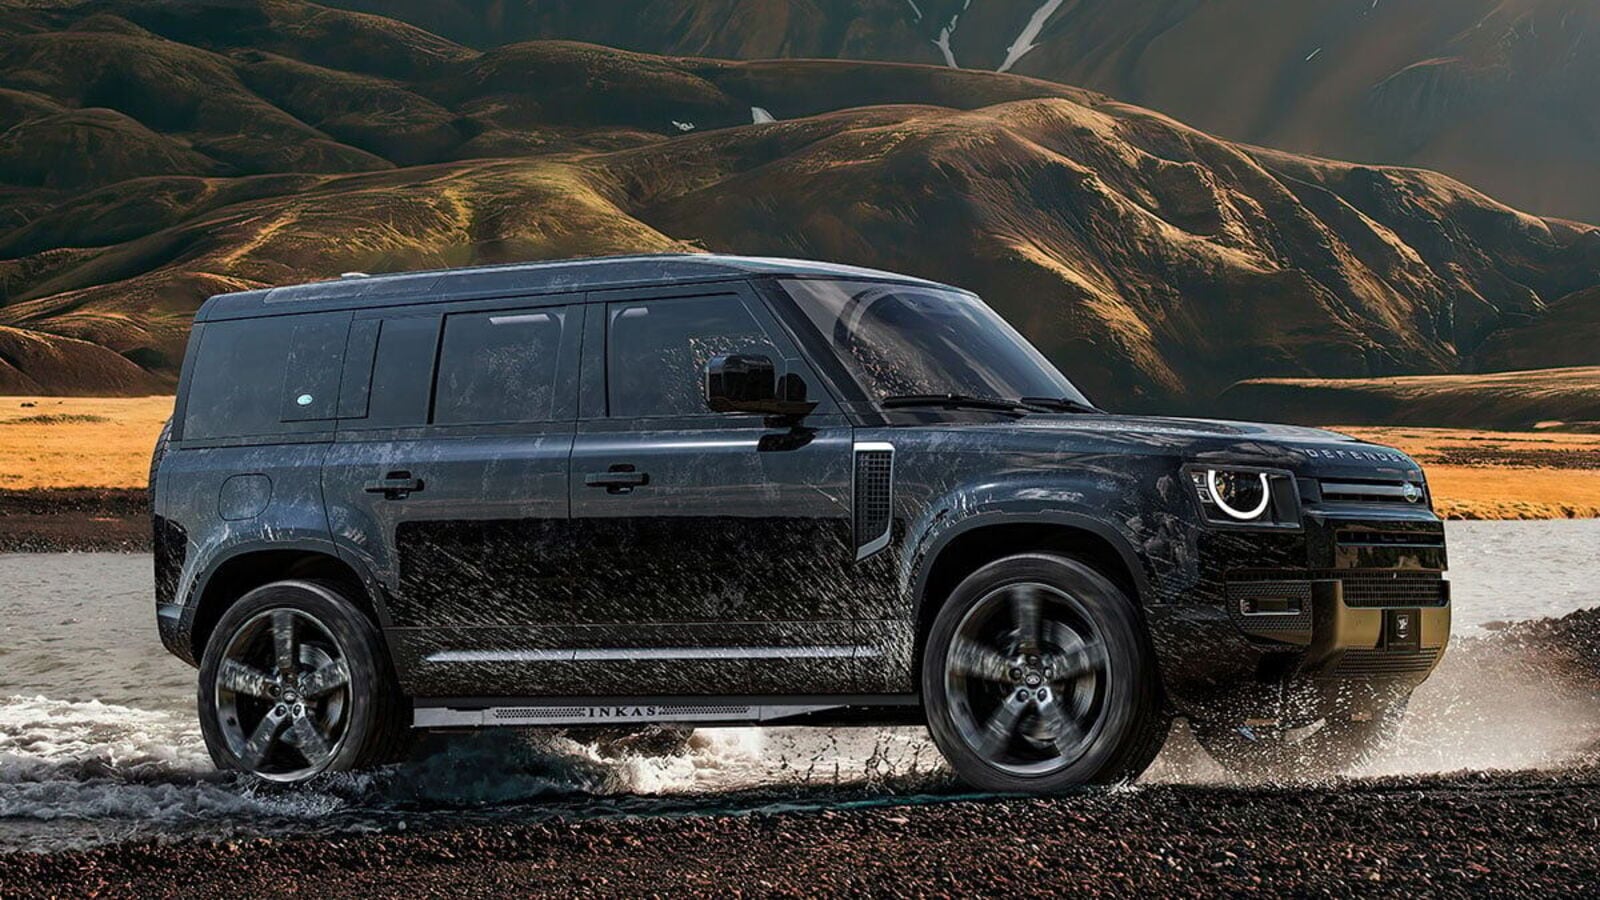 This stealthy Land Rover Defender is built like a tank. Details